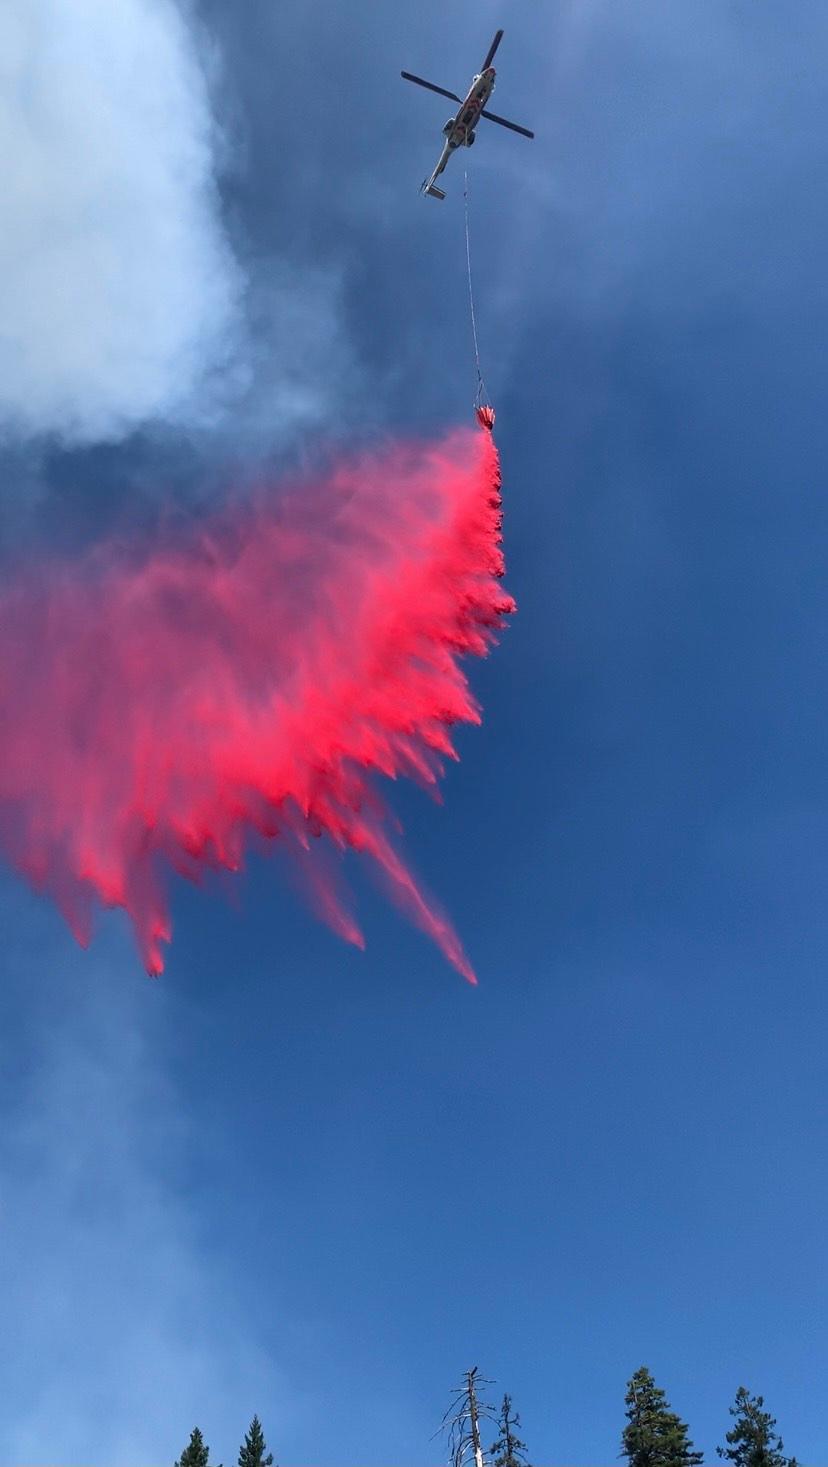 A white and green helicopter drops red fire retardant from an orange bucket